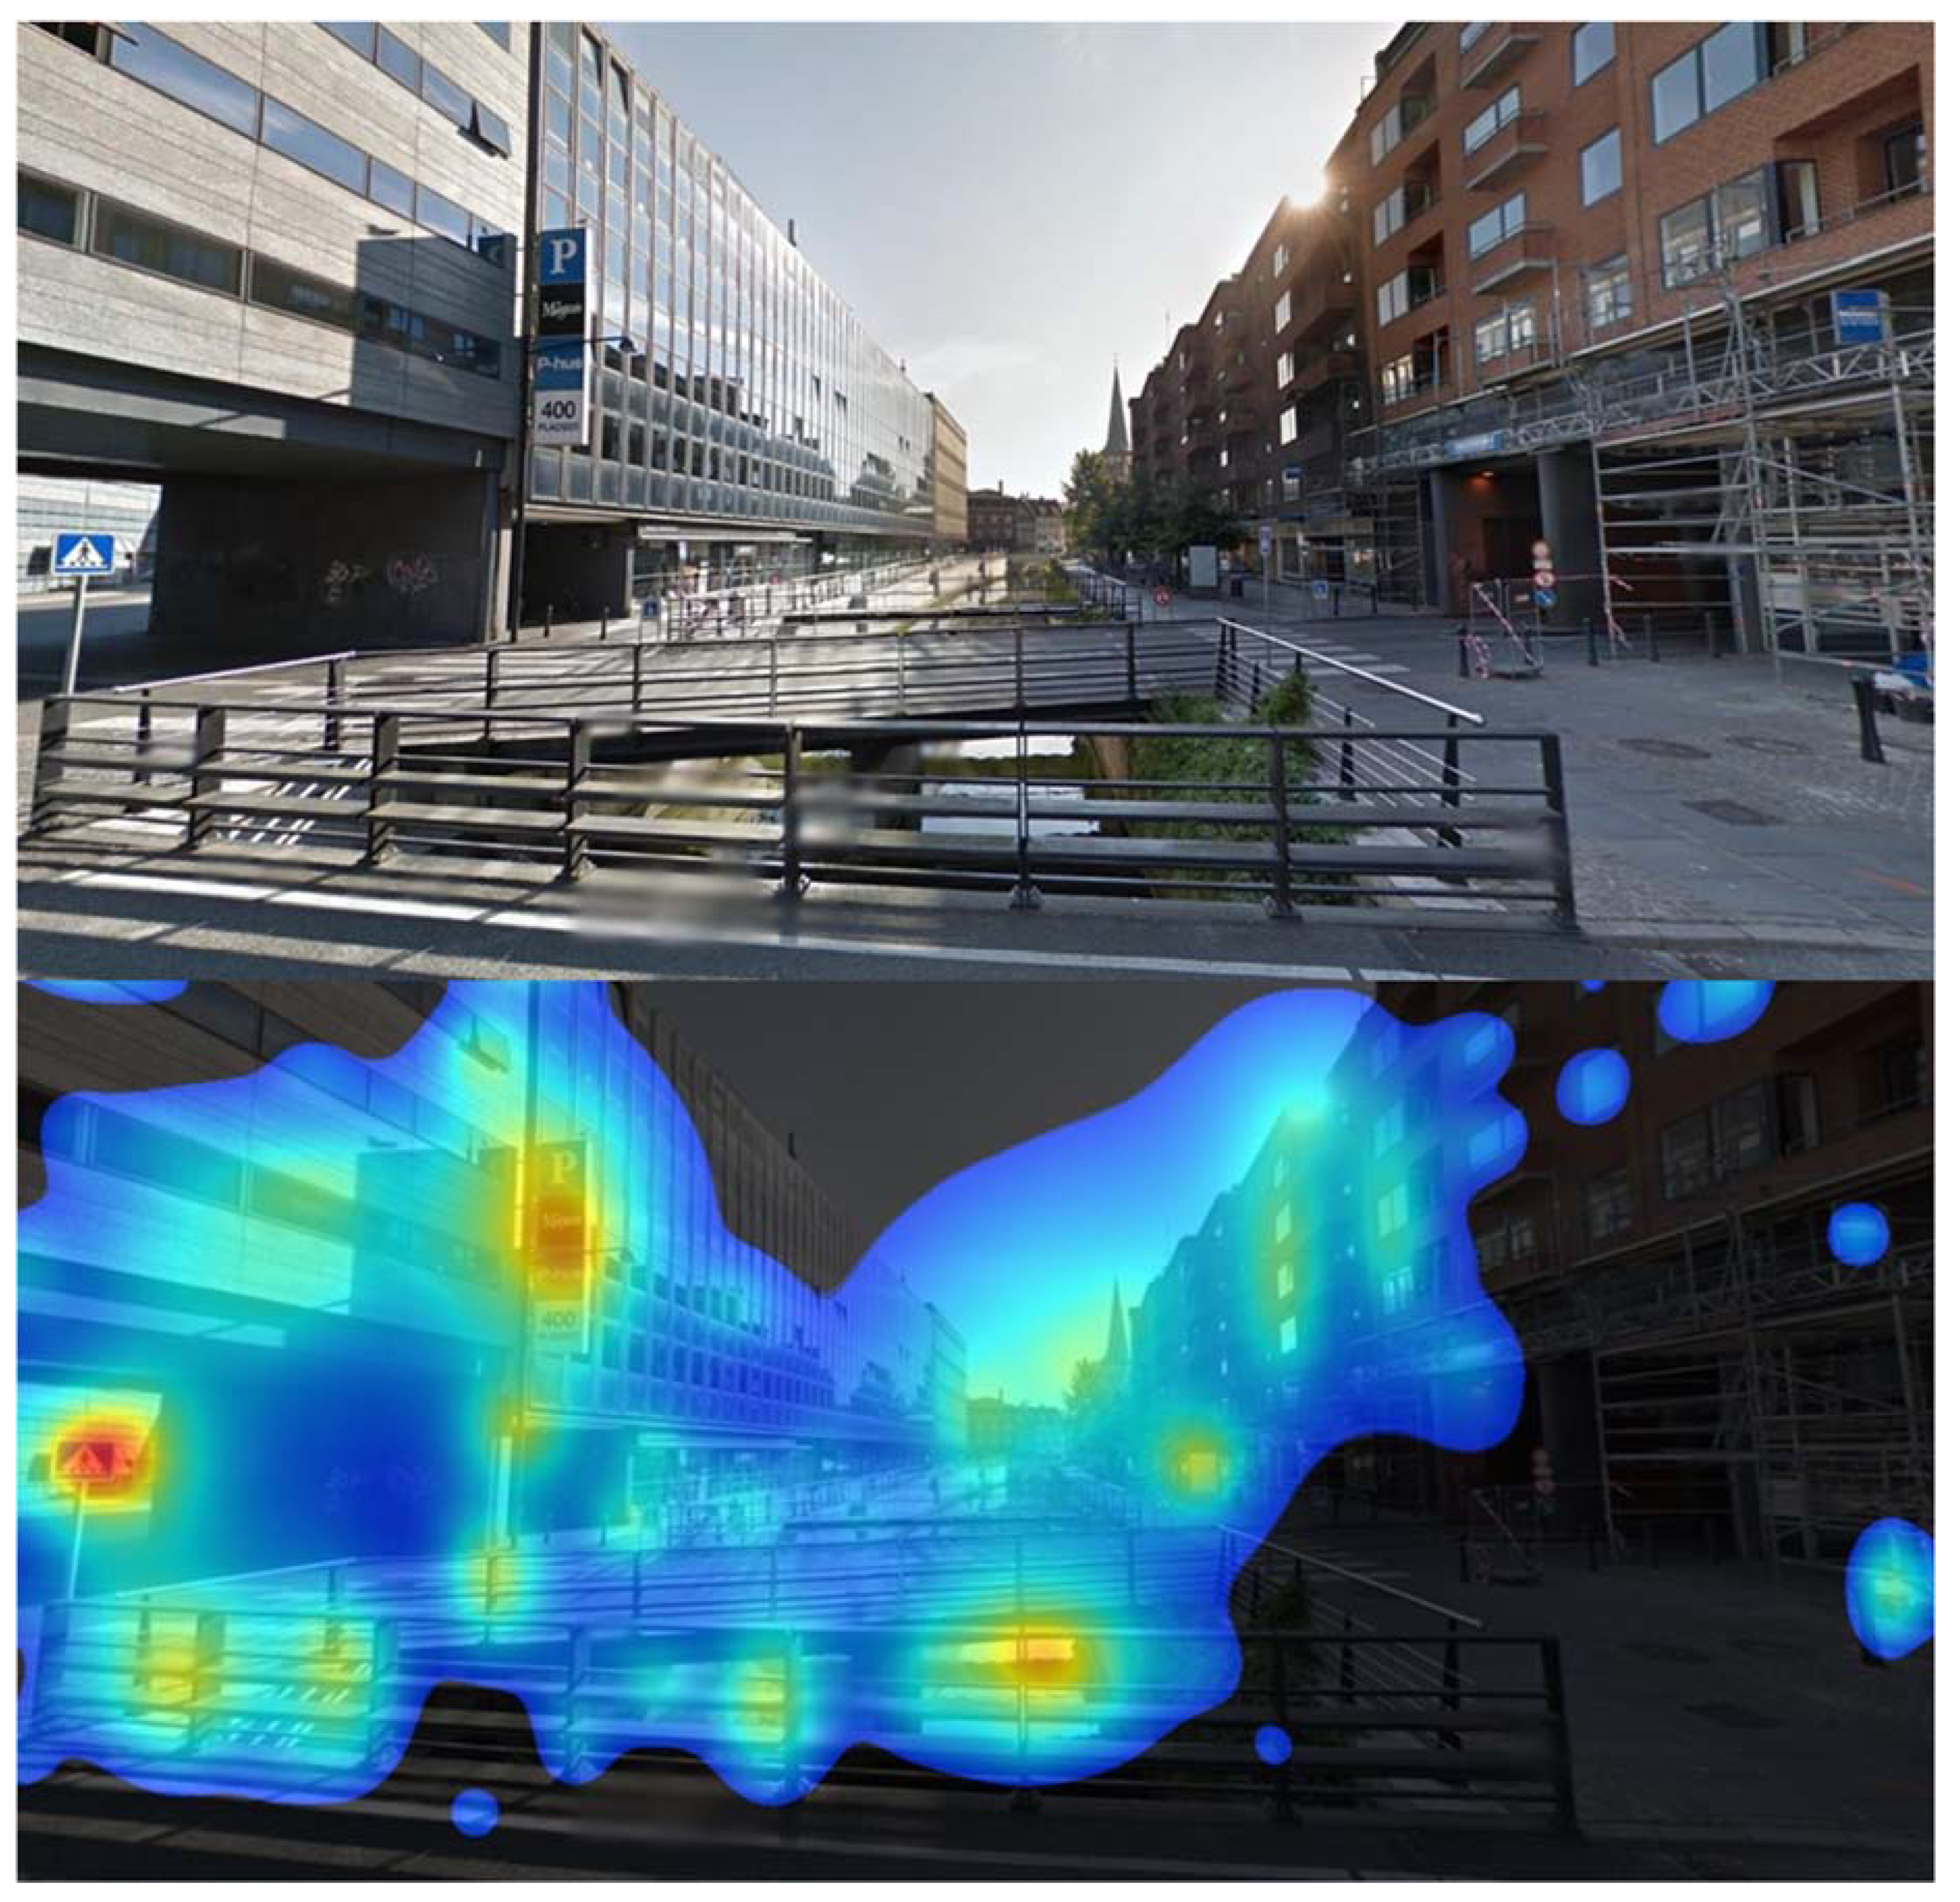 Urban Science | Free Full-Text | What Happens in Your Brain When You Walk  Down the Street? Implications of Architectural Proportions, Biophilia, and  Fractal Geometry for Urban Science